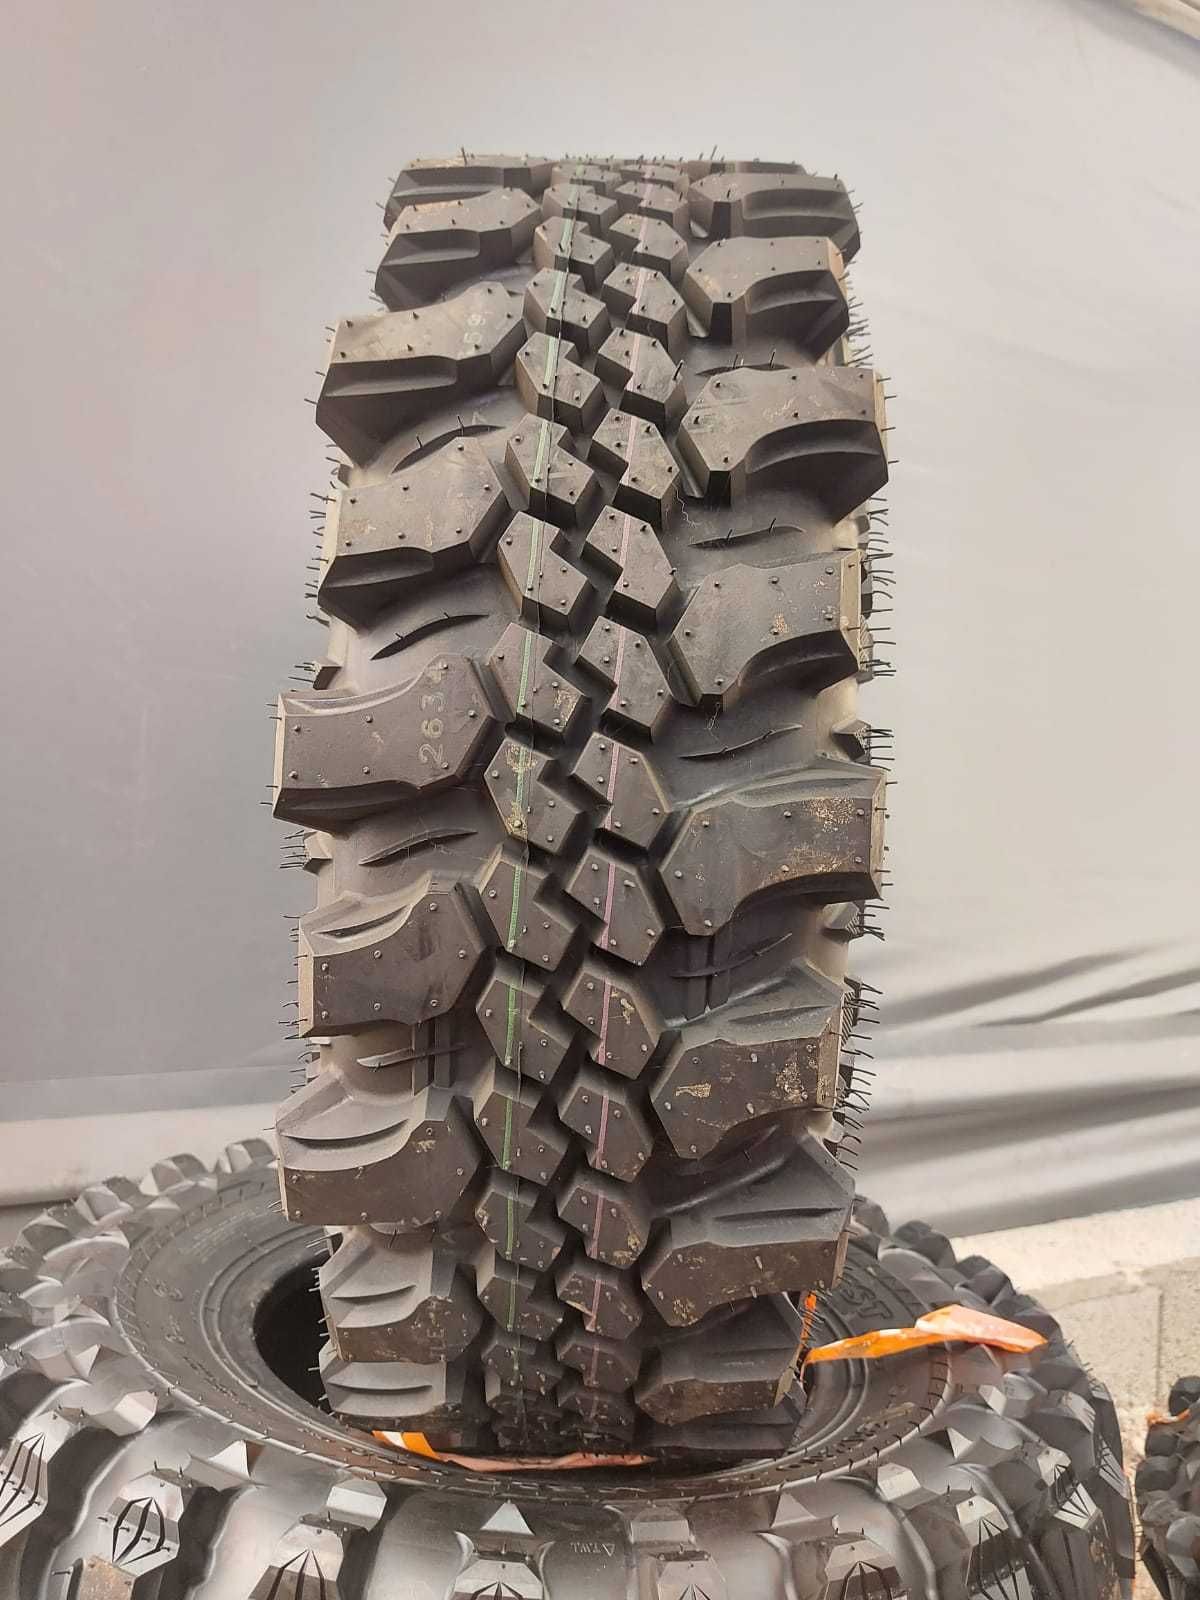 35x10.5 R16 | 275/85 R16 CST by MAXXIS CL18 Anvelopa OFF-ROAD